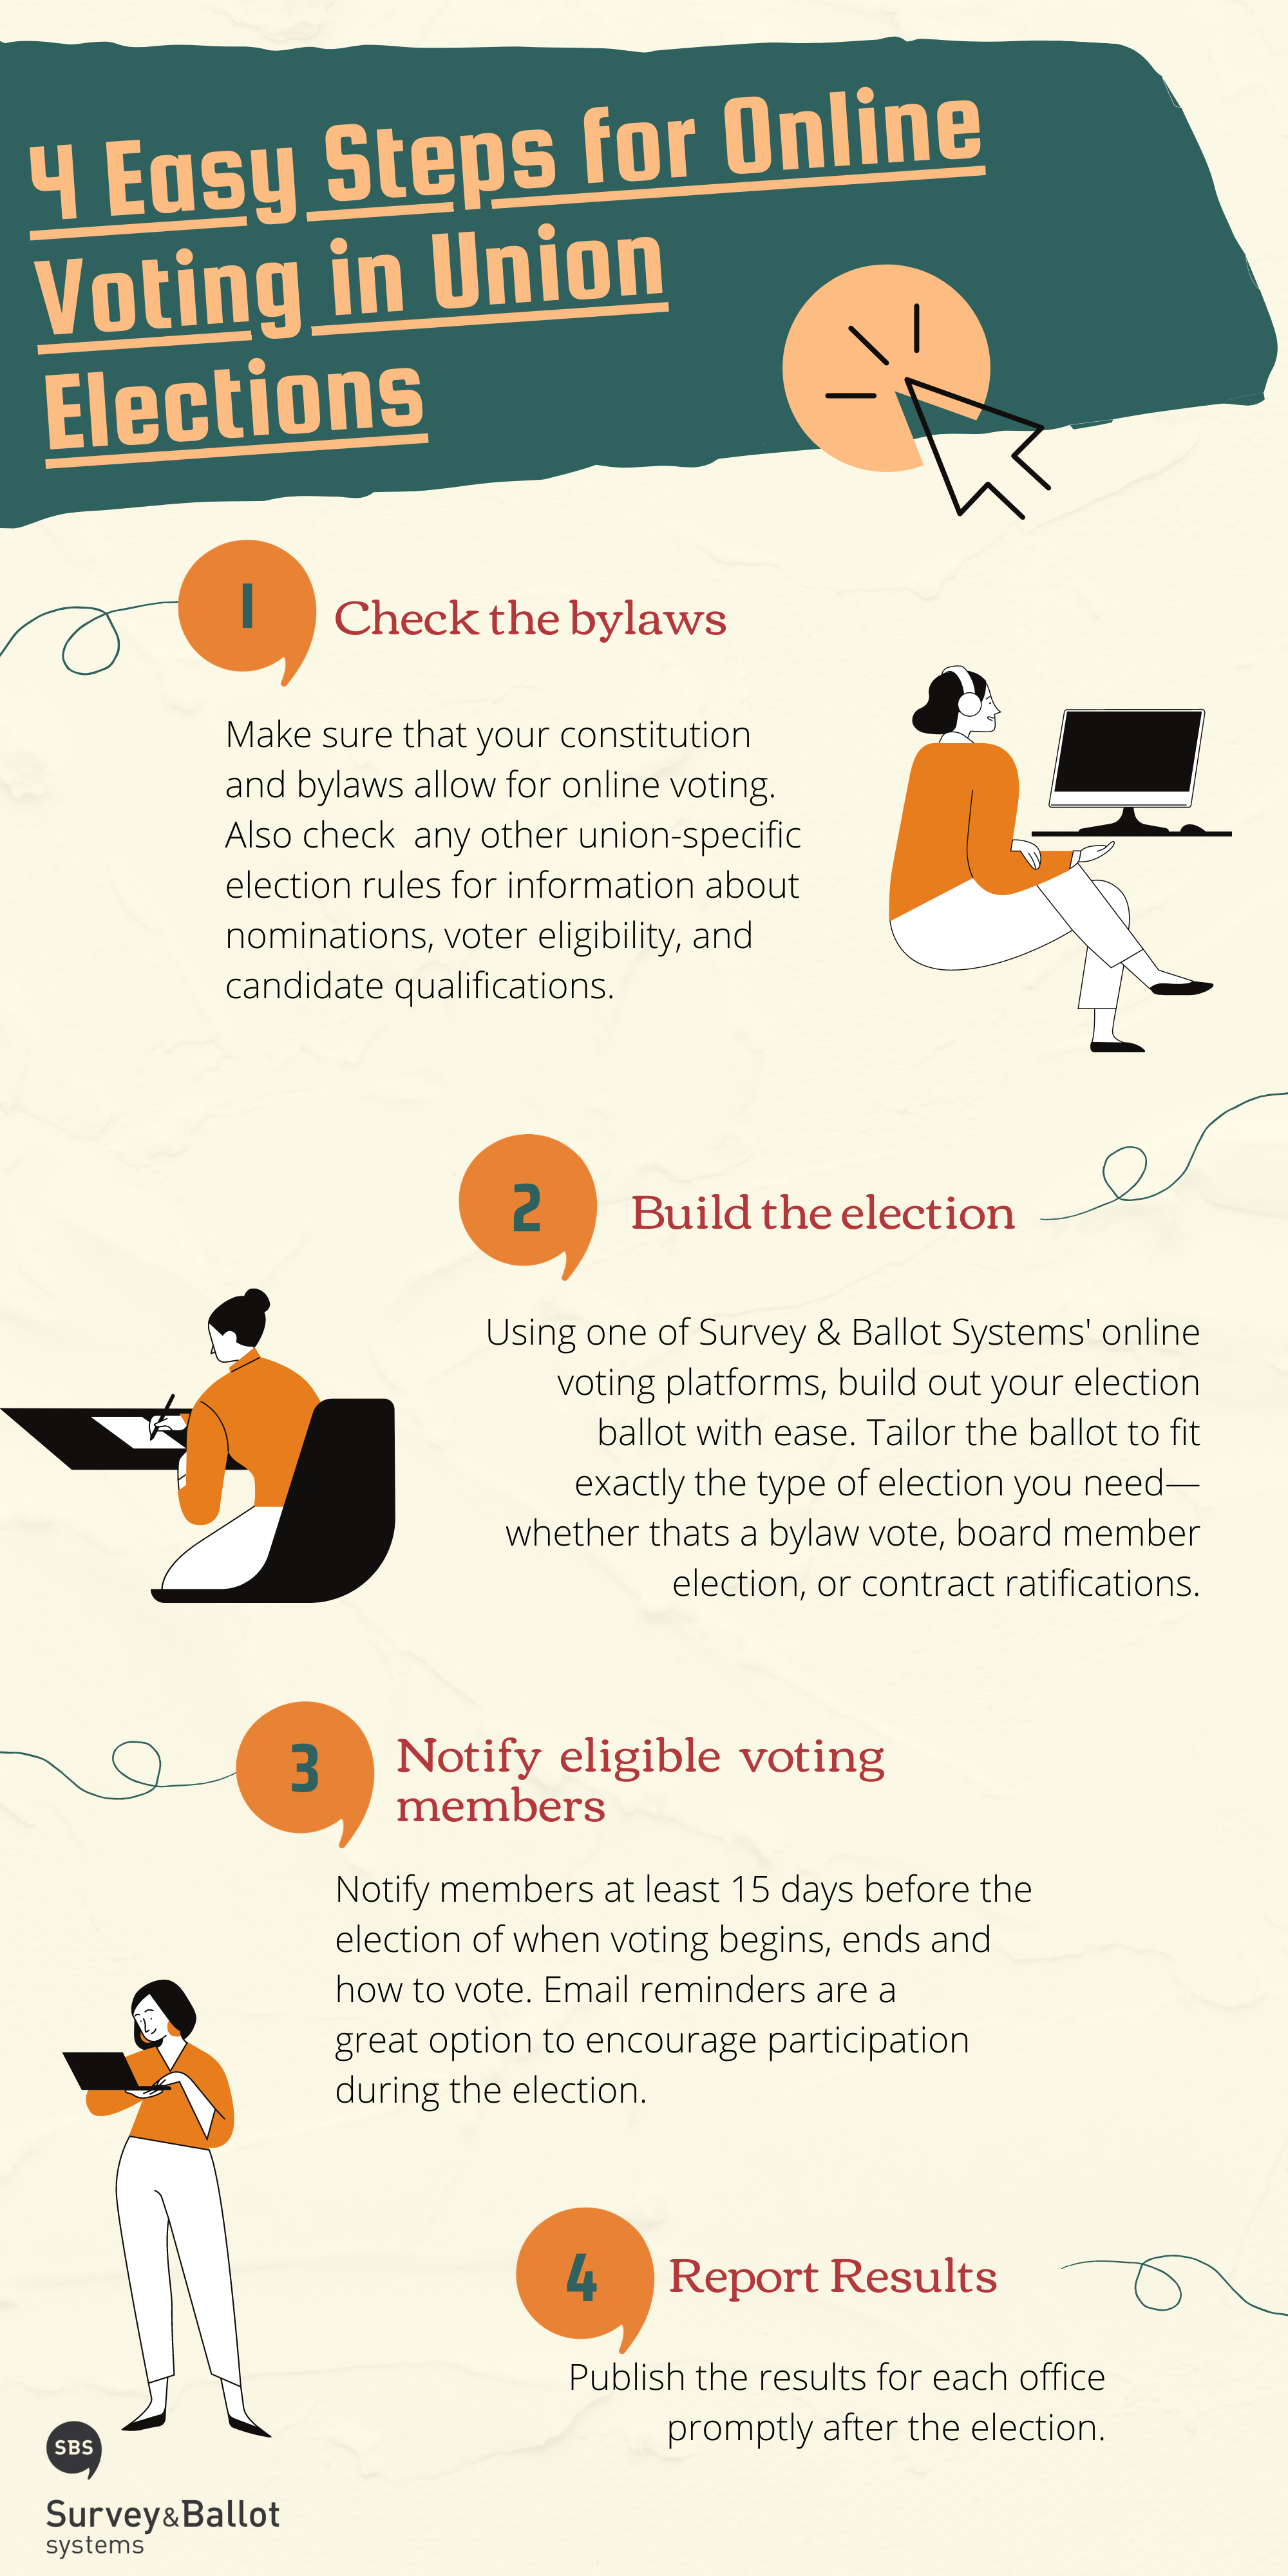 Sta op Portugees Embryo 4 Easy Steps for Online Voting in Union Elections | SBS